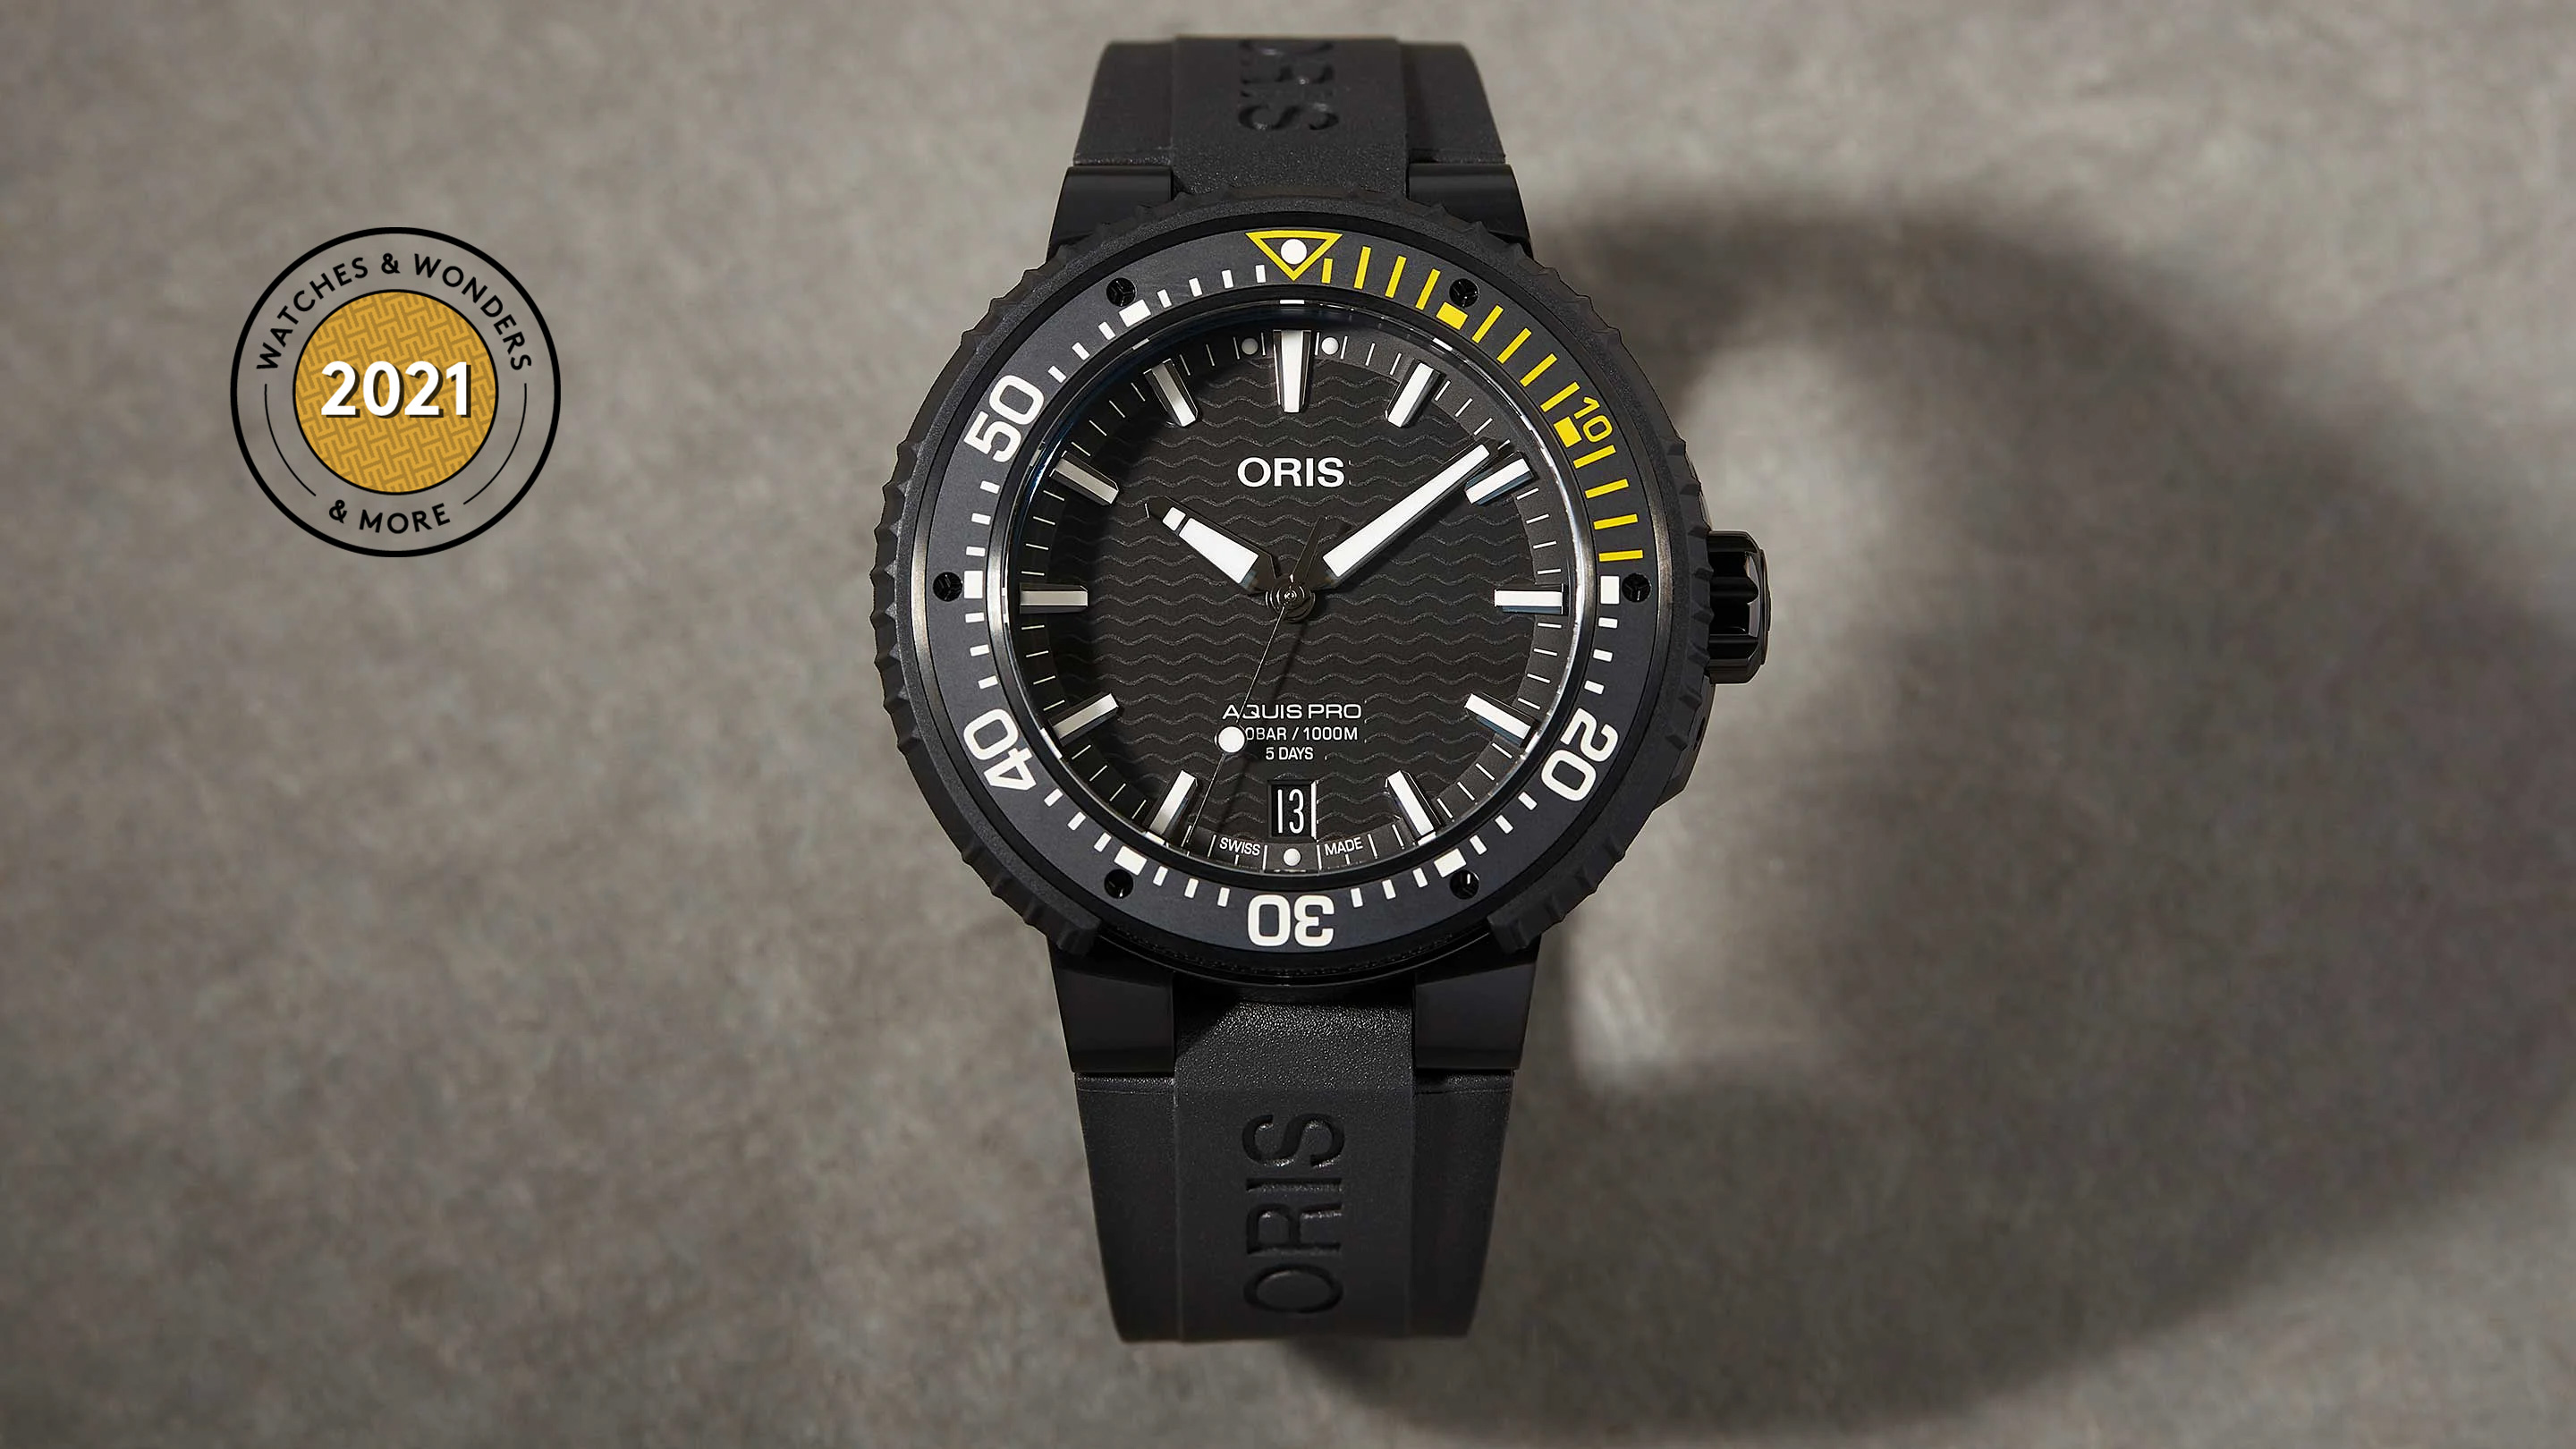 Introducing: Oris' Top Tier Diver With 